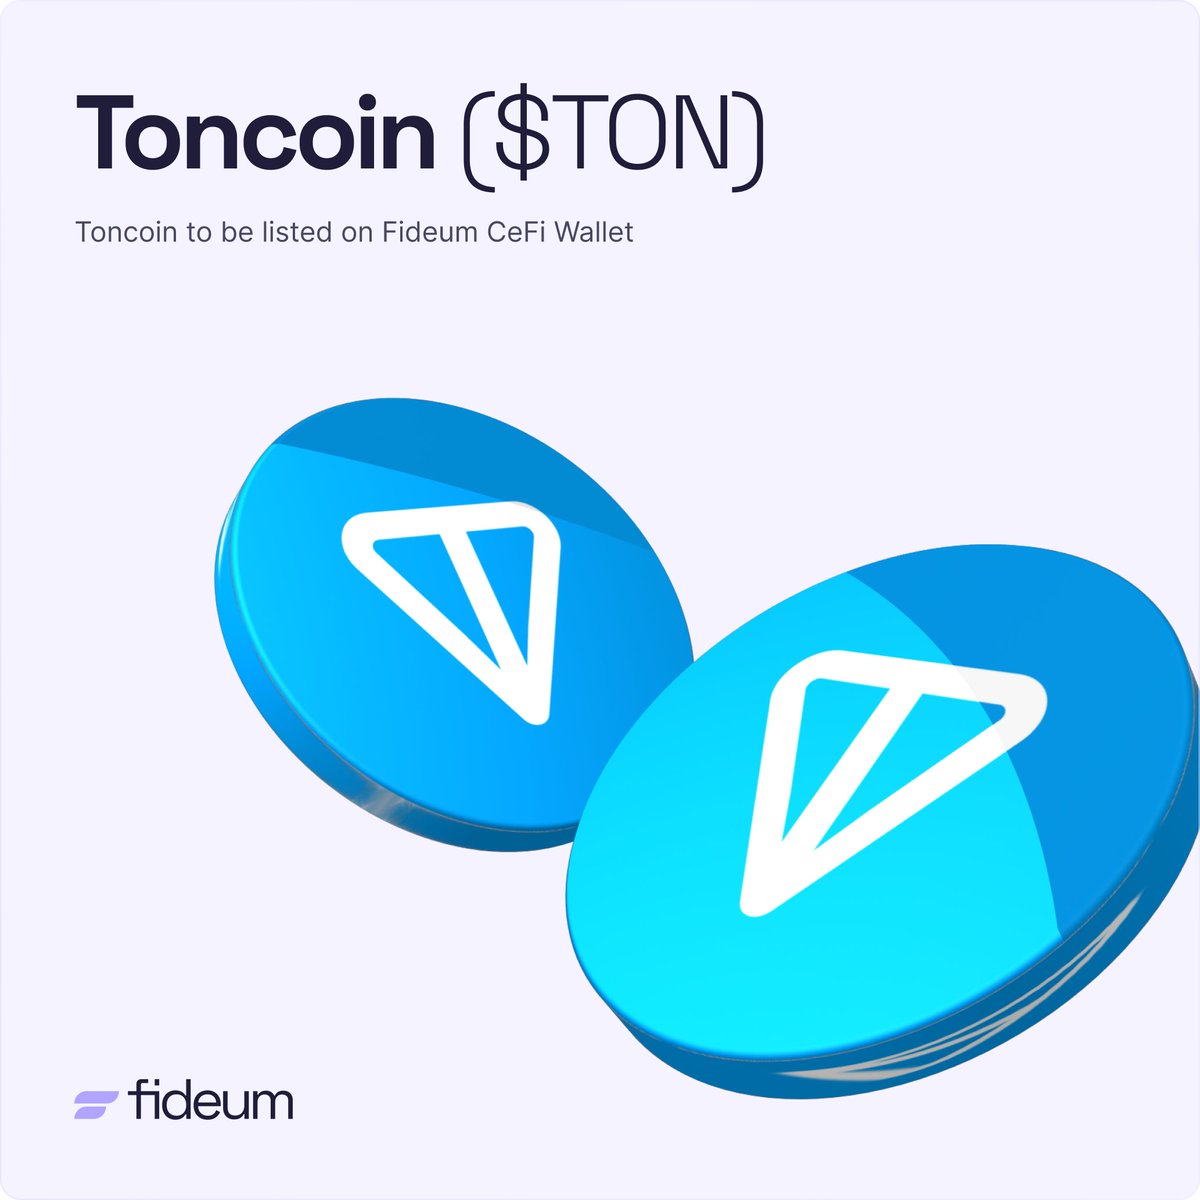 Toncoin ( $TON ) is coming to Fideum's CeFi platform tomorrow, May 8th.💥 Get ready to transfer and trade TON on Fideum. You'll also have the flexibility to swap $TON with $FI directly, giving you more ways to manage and grow your digital assets.